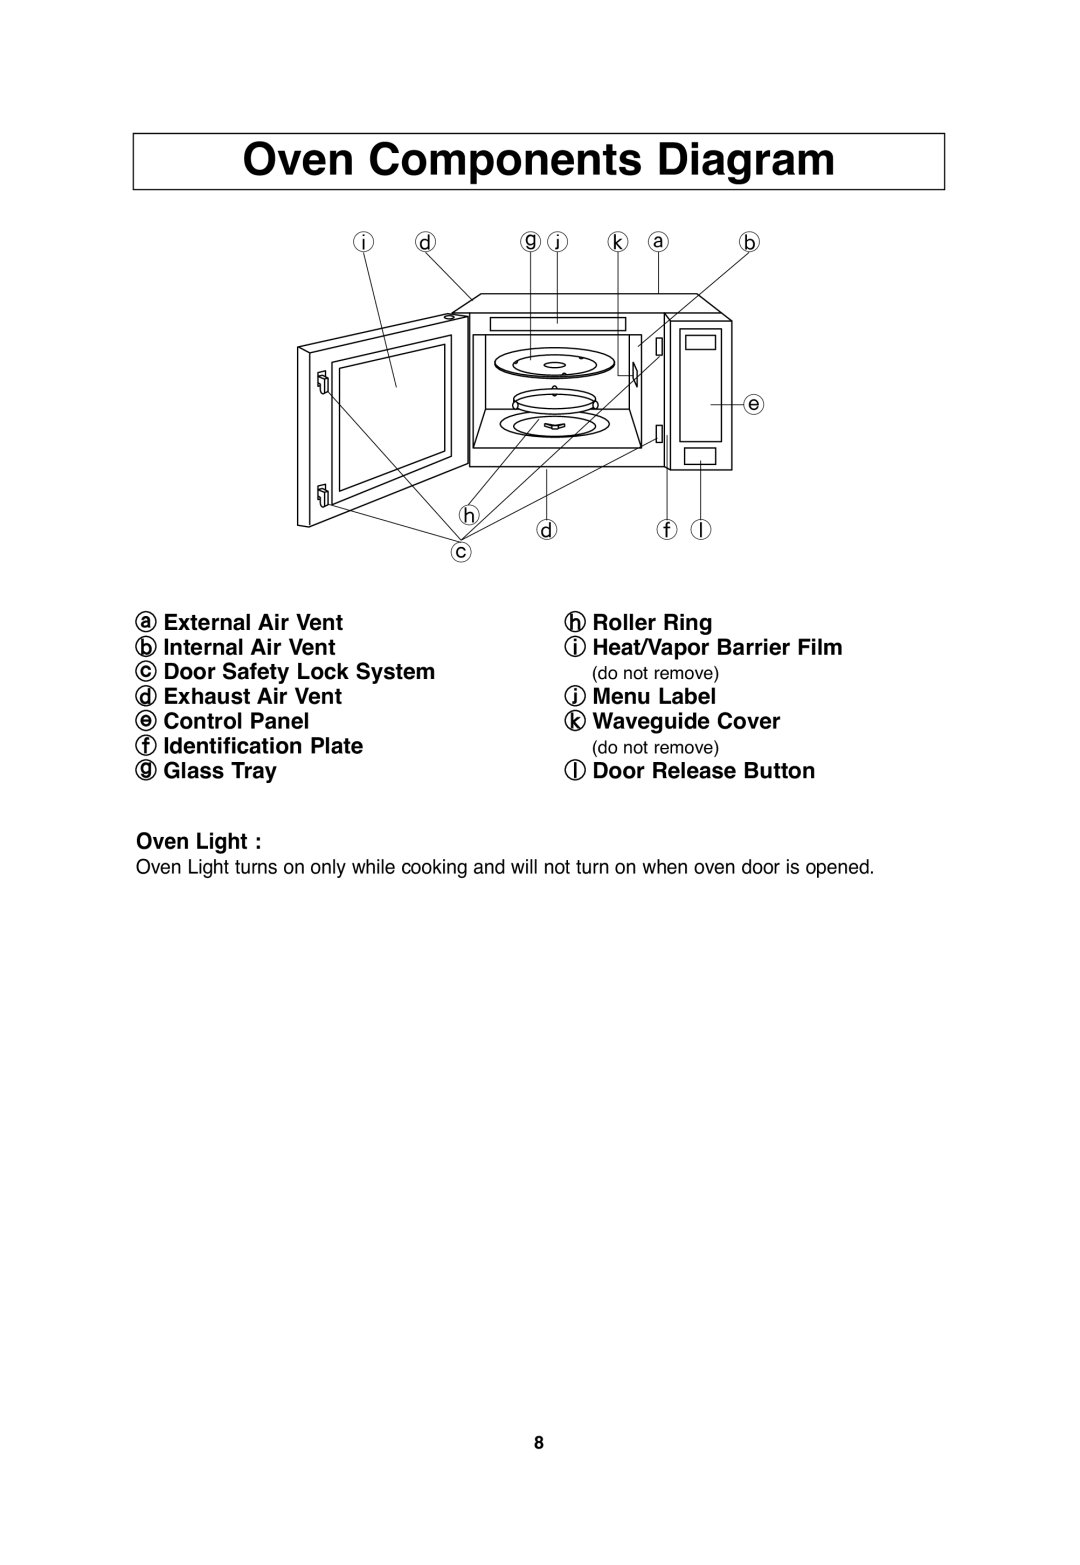 Panasonic NN-T665, NN-T655, NN-SN656 important safety instructions Oven Components Diagram 